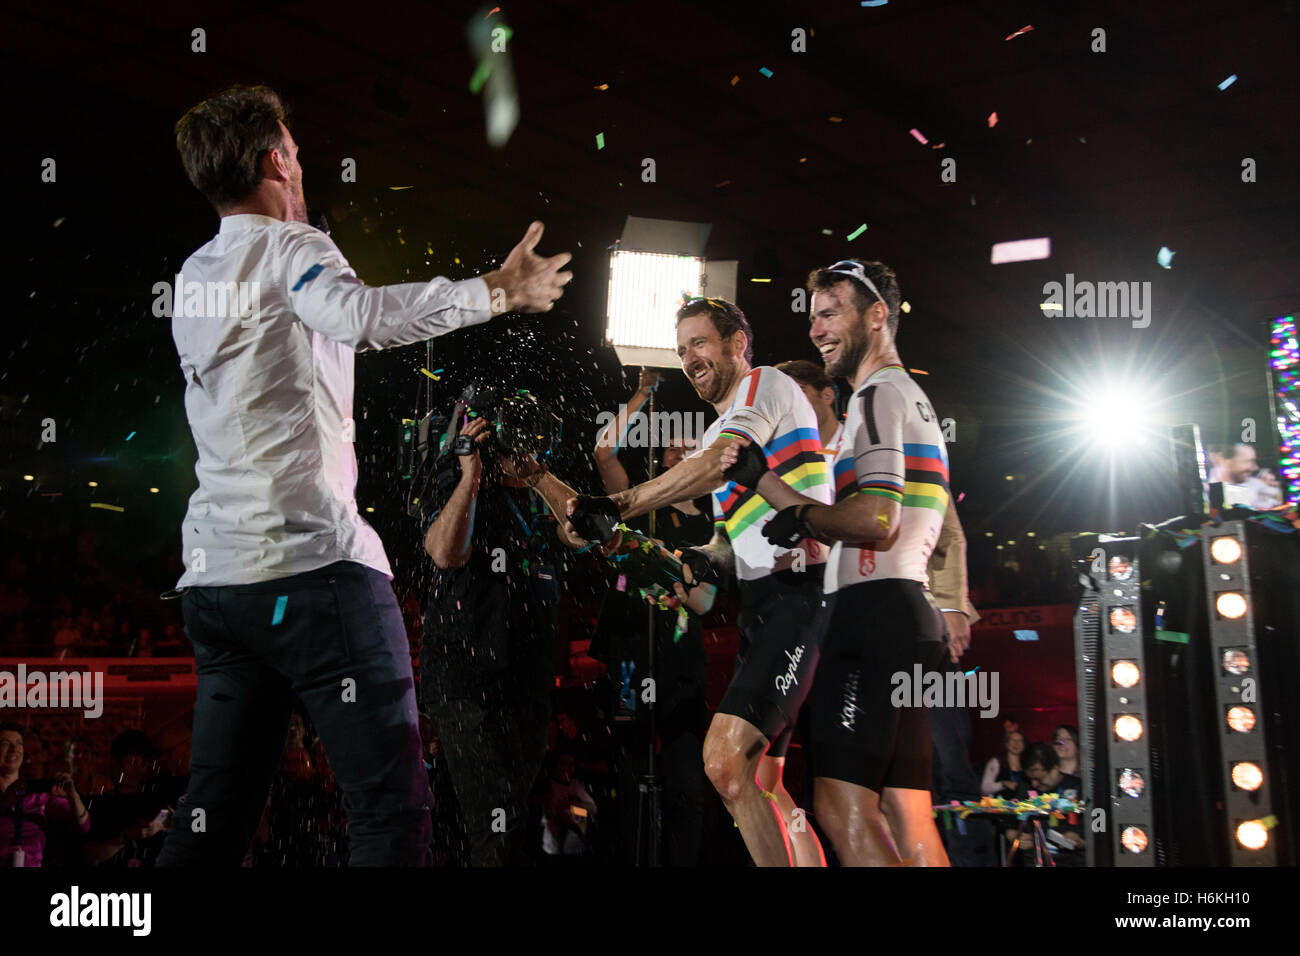 London, UK  30th October, 2016.   Cyclists compete  in the final day of  the London Six Day cycling event.  Lee Valley Velodrome, Olympic Park, London, Bradley Wiggins and Mark Cavendish finish second. Bradley Wiggins pours champagne over the presenter. UK. Copyright Carol Moir/Alamy Live News. Stock Photo